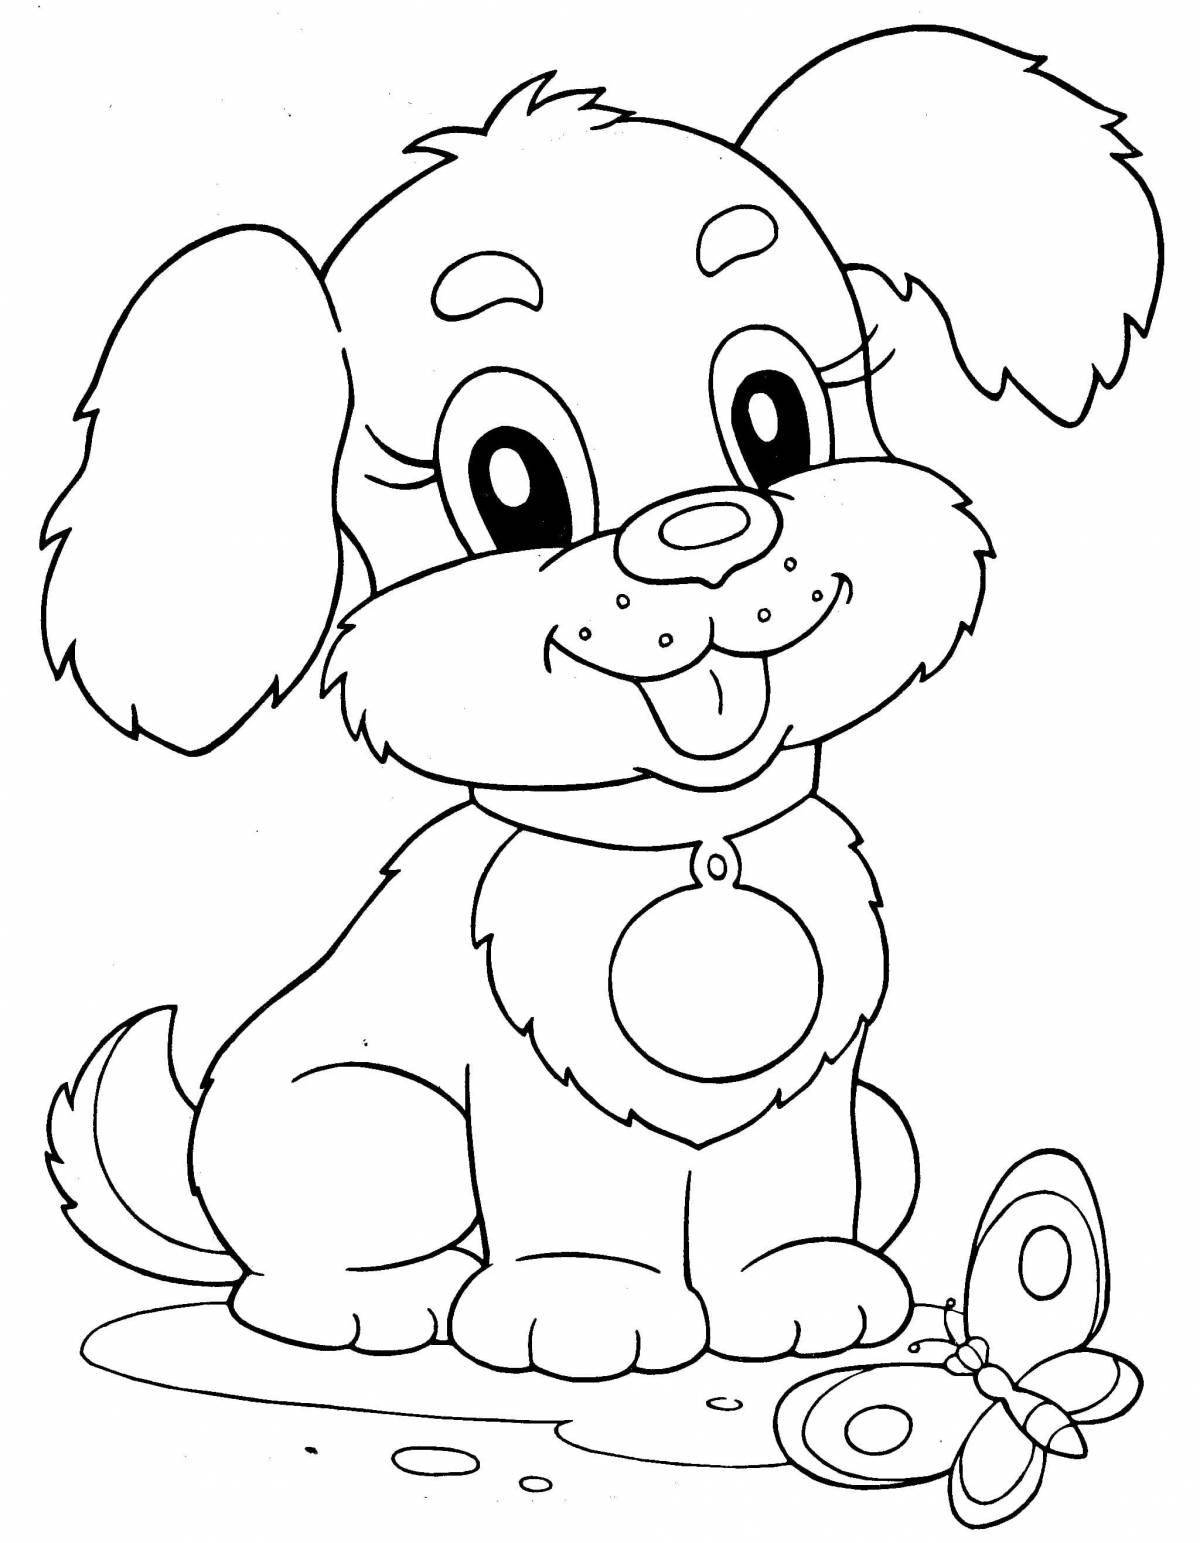 Funny animal coloring pages for 5 year olds